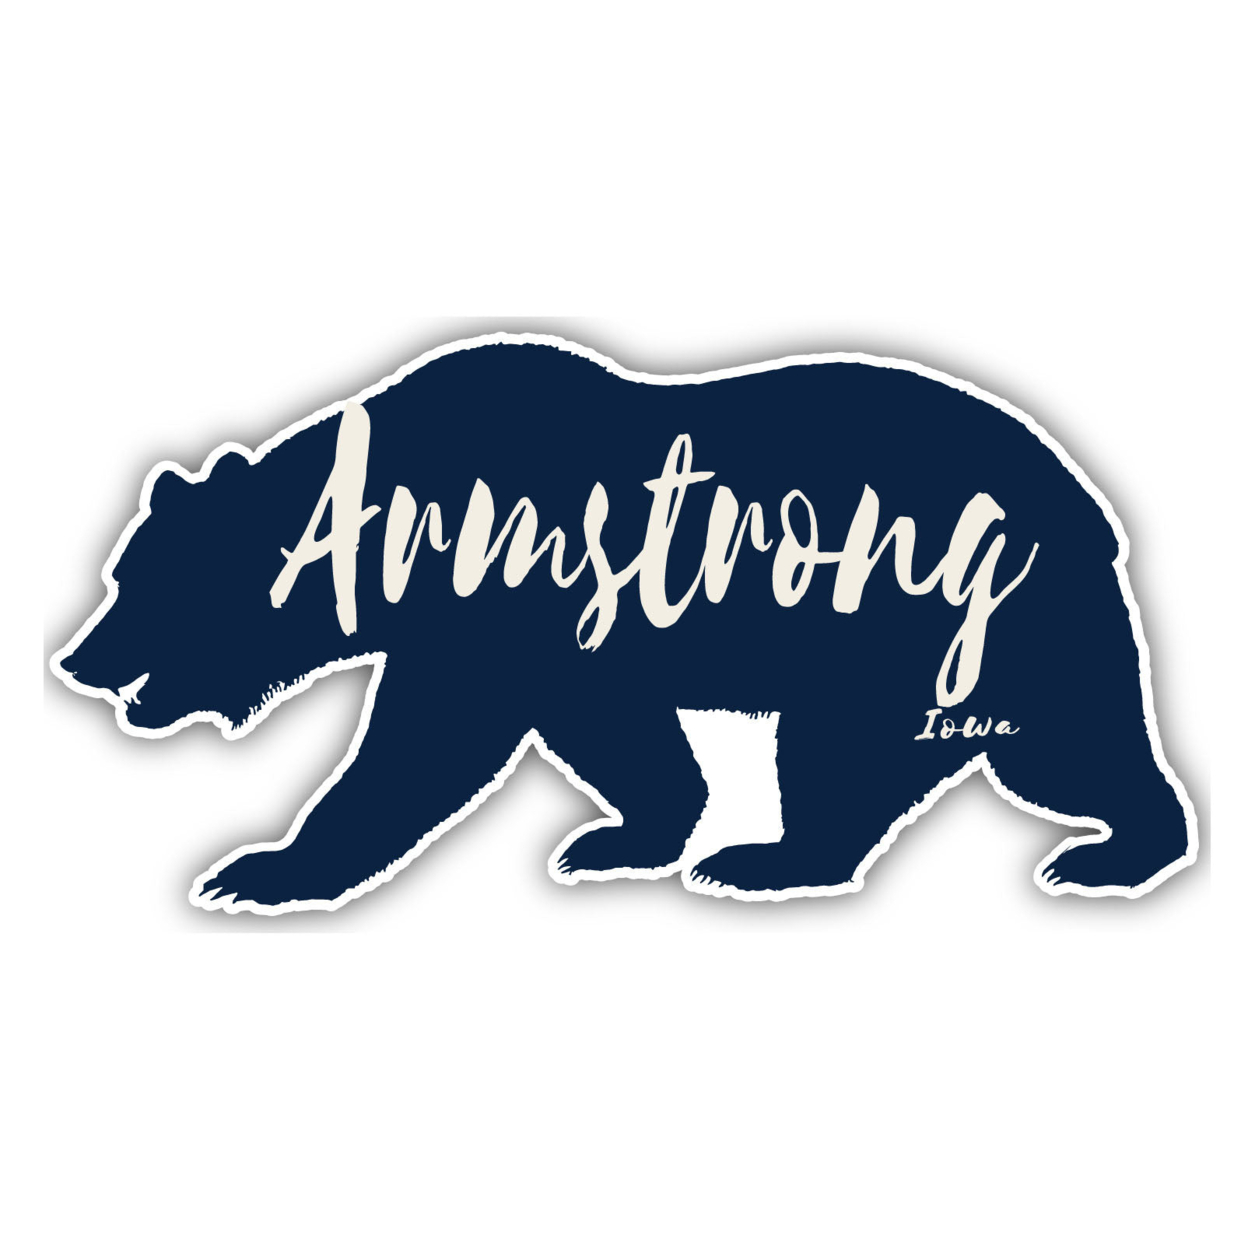 Armstrong Iowa Souvenir Decorative Stickers (Choose Theme And Size) - Single Unit, 4-Inch, Bear